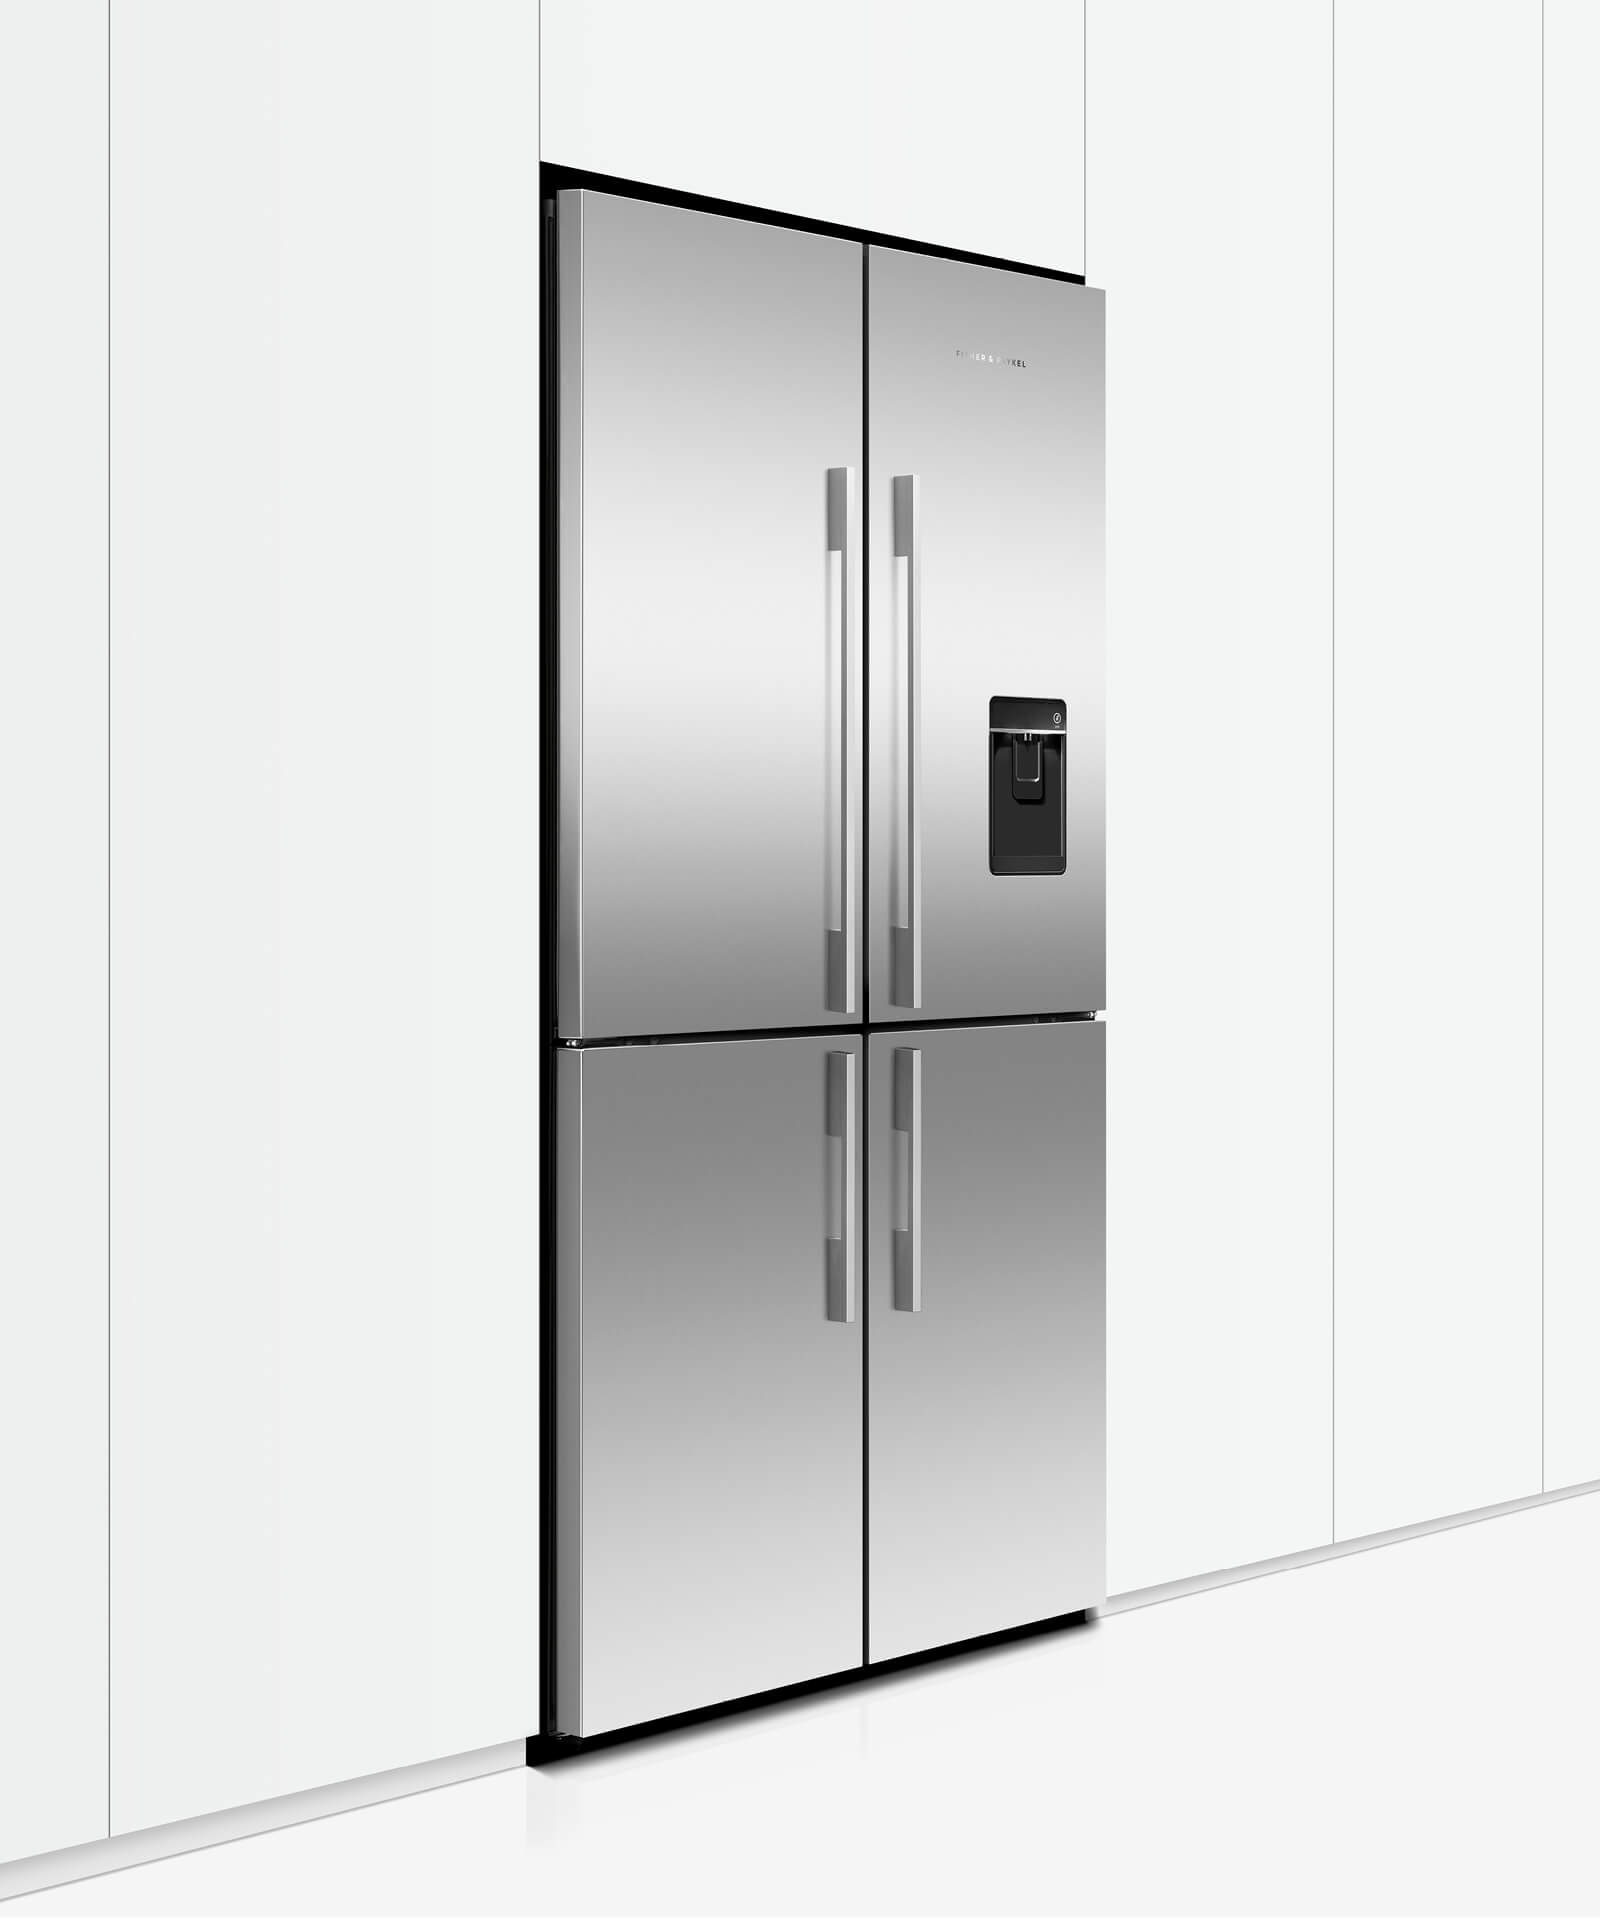 Fisher and paykel french door fridge manual